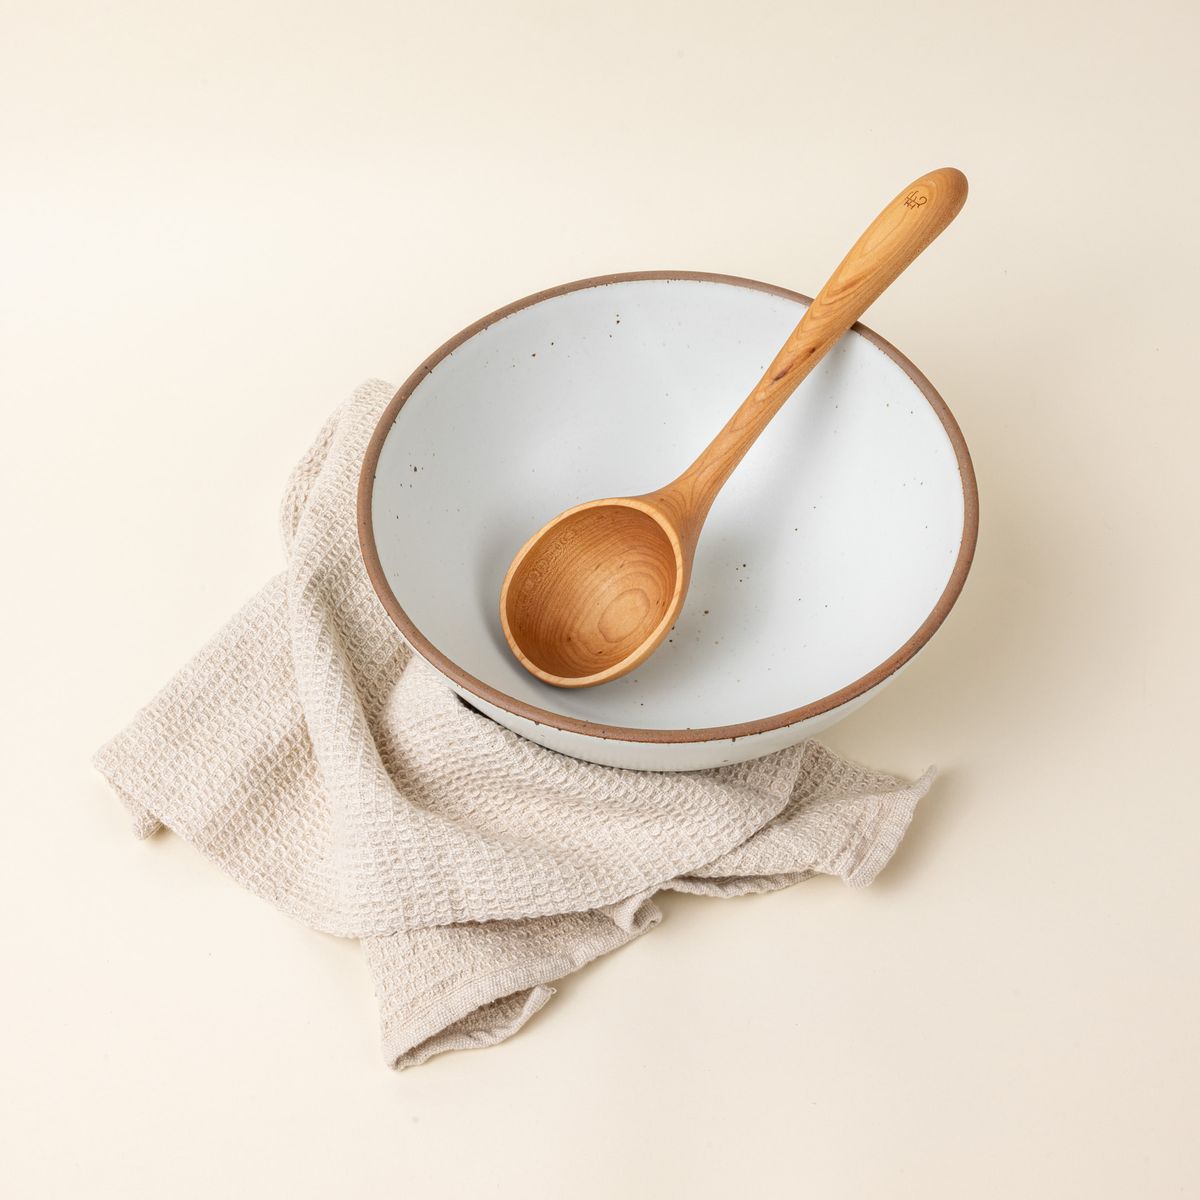 A wooden ladle with a large scoop sits inside a large white ceramic mixing bowl with a cream towel.